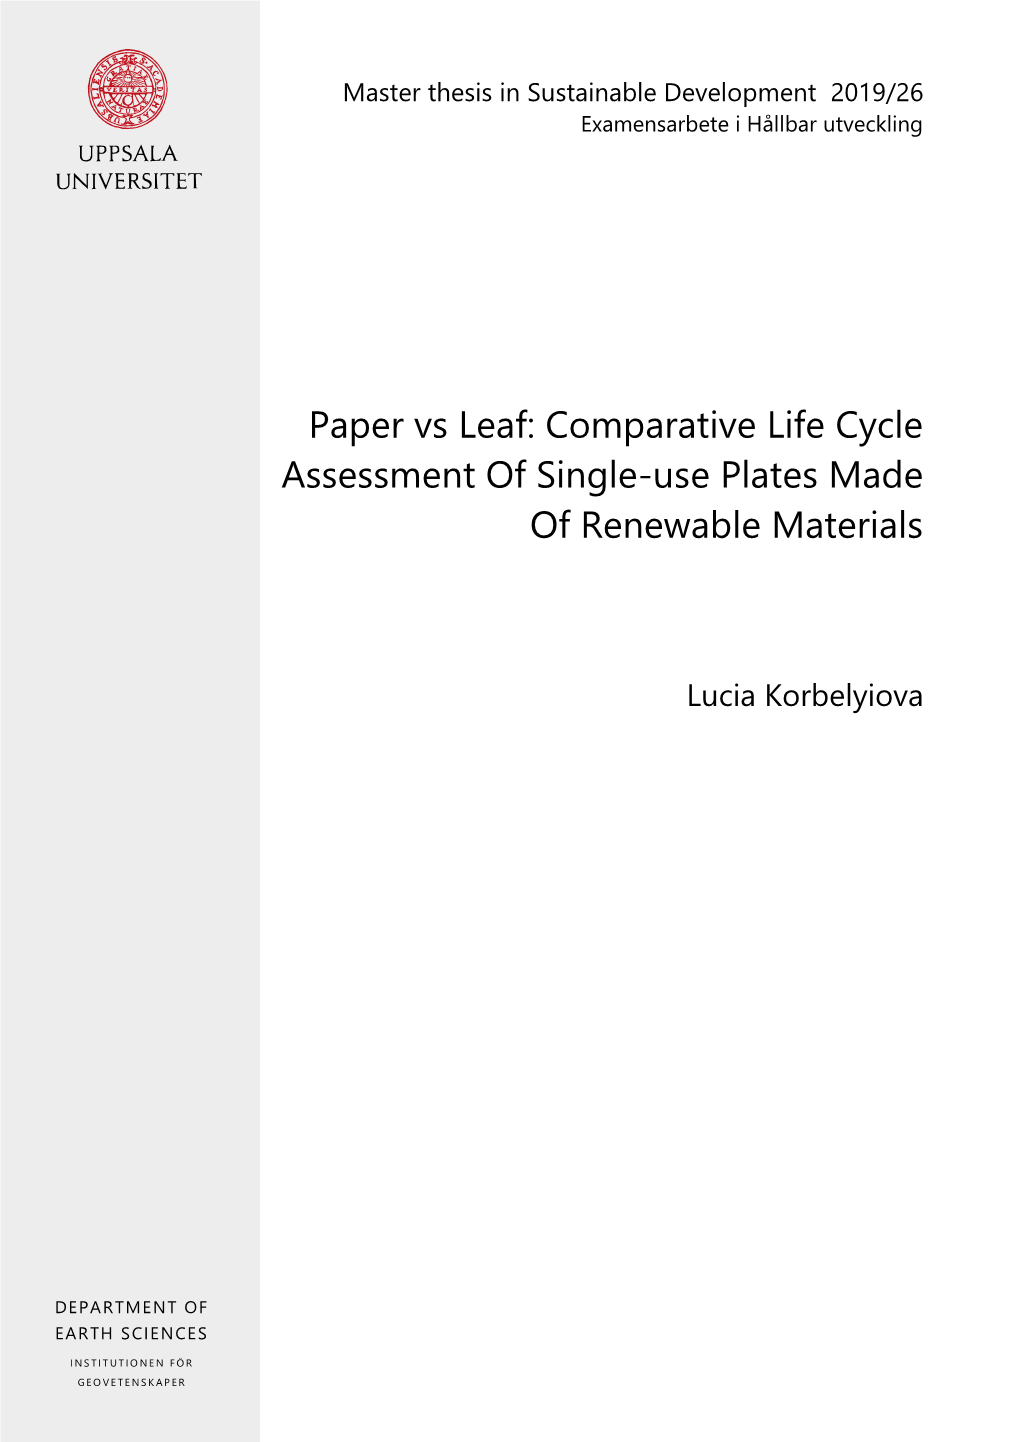 Paper Vs Leaf: Comparative Life Cycle Assessment of Single-Use Plates Made of Renewable Materials